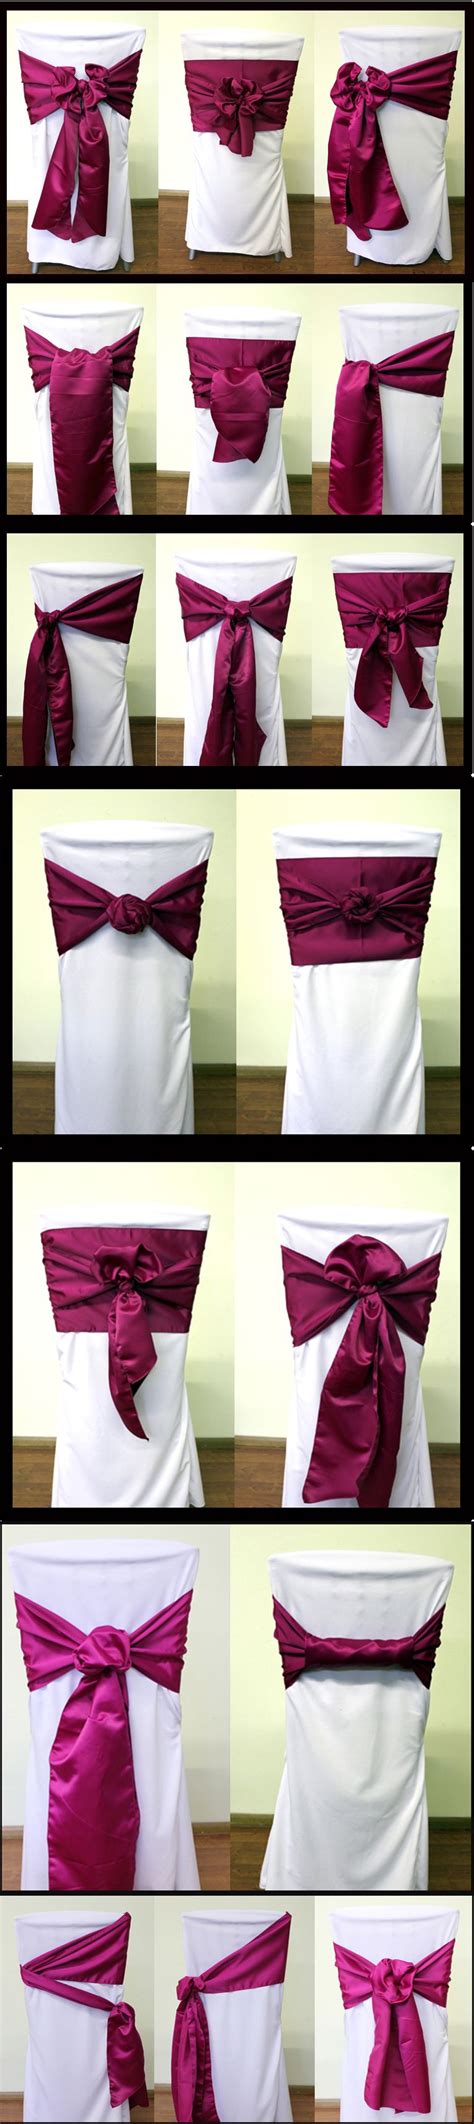 Dhgate.com provide a large selection of promotional chair sashes accessories on sale at cheap price and excellent crafts. 18 ways to tie a chair sash | Wedding chair sashes ...